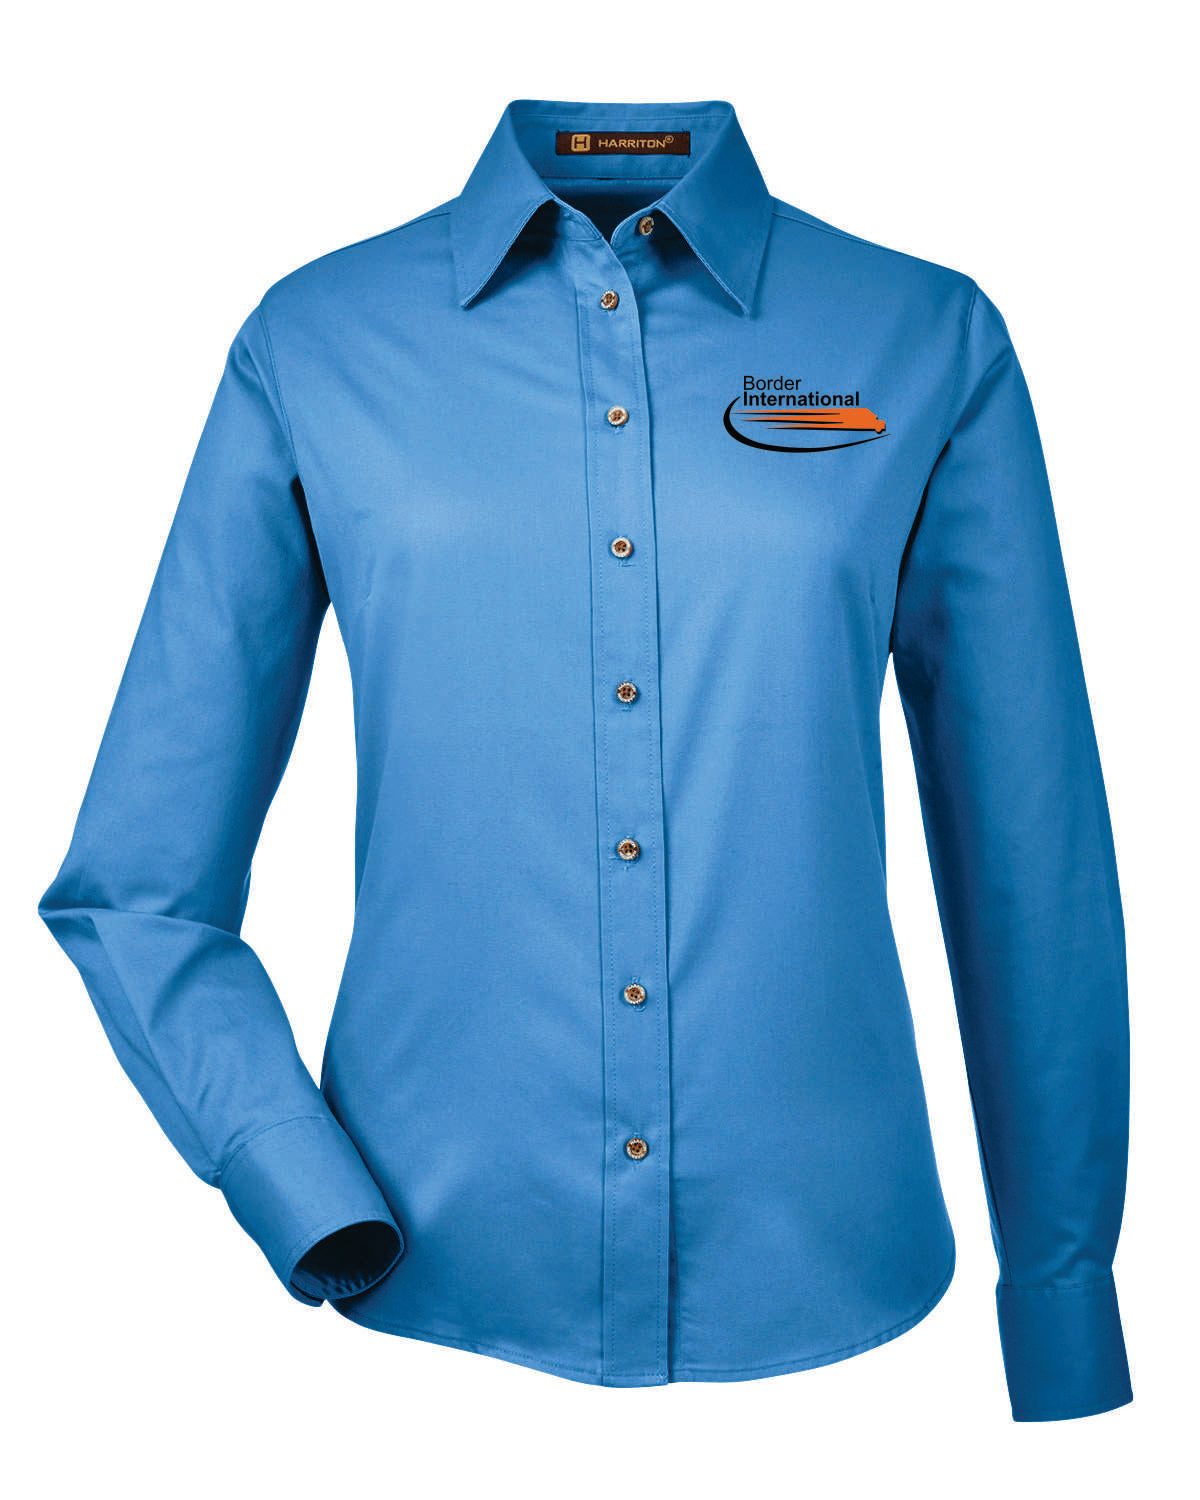 Border International Ladies' Easy Blend™ Long-Sleeve Twill Shirt with Stain-Release